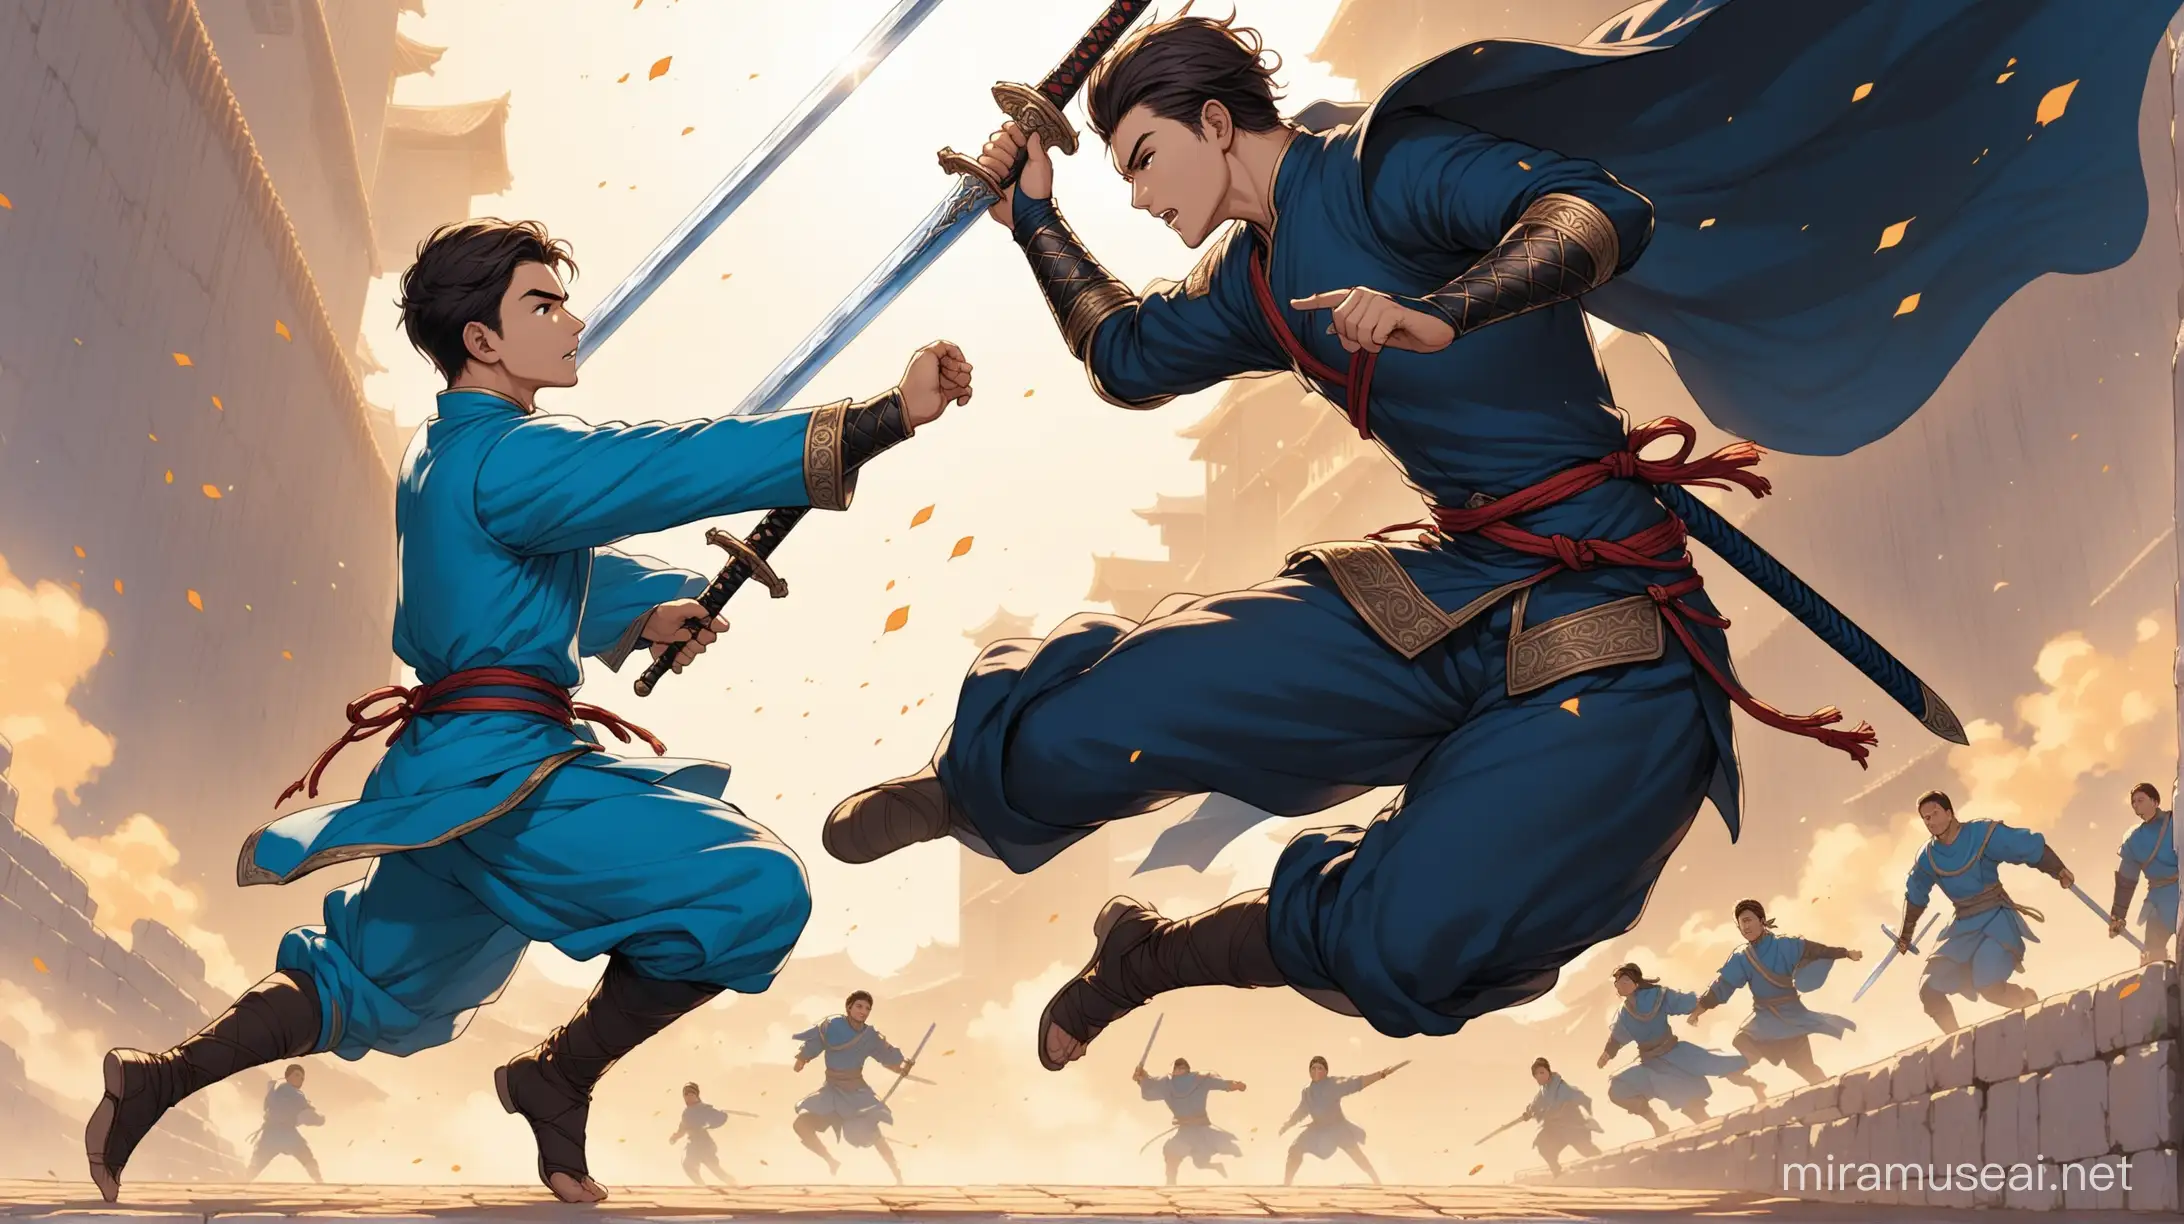 The young warrior in blue clothes jumped with his sword towards the black clothed man